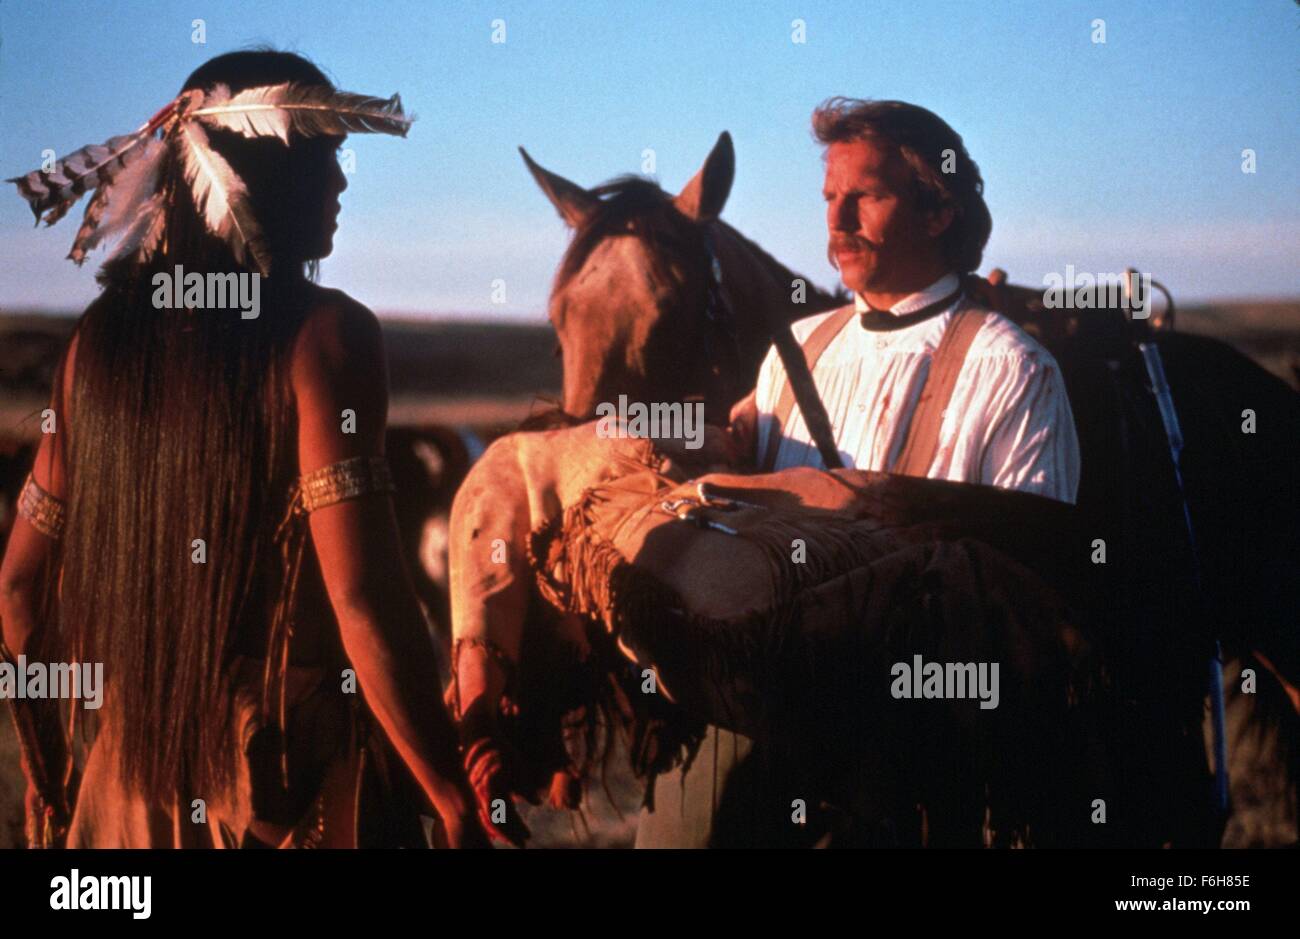 RELEASE DATE: November 21, 1990  TITLE: Dances With Wolves  STUDIO: Columbia TriStar  DIRECTOR: Kevin Costner  PLOT: Having been sent to a remote outpost in the wilderness of the Dakota territory during the American Civil War, Lieutenant John Dunbar encounters, and is eventually accepted into, the local Sioux tribe. He is known as 'Dances with Wolves' to them and as time passes he becomes enamoured by the beautiful 'Stands With a Fist'. Not soon after, the frontier becomes the frontier no more, and as the army advances on the plains, John must make a decision that will not only affect him, but Stock Photo